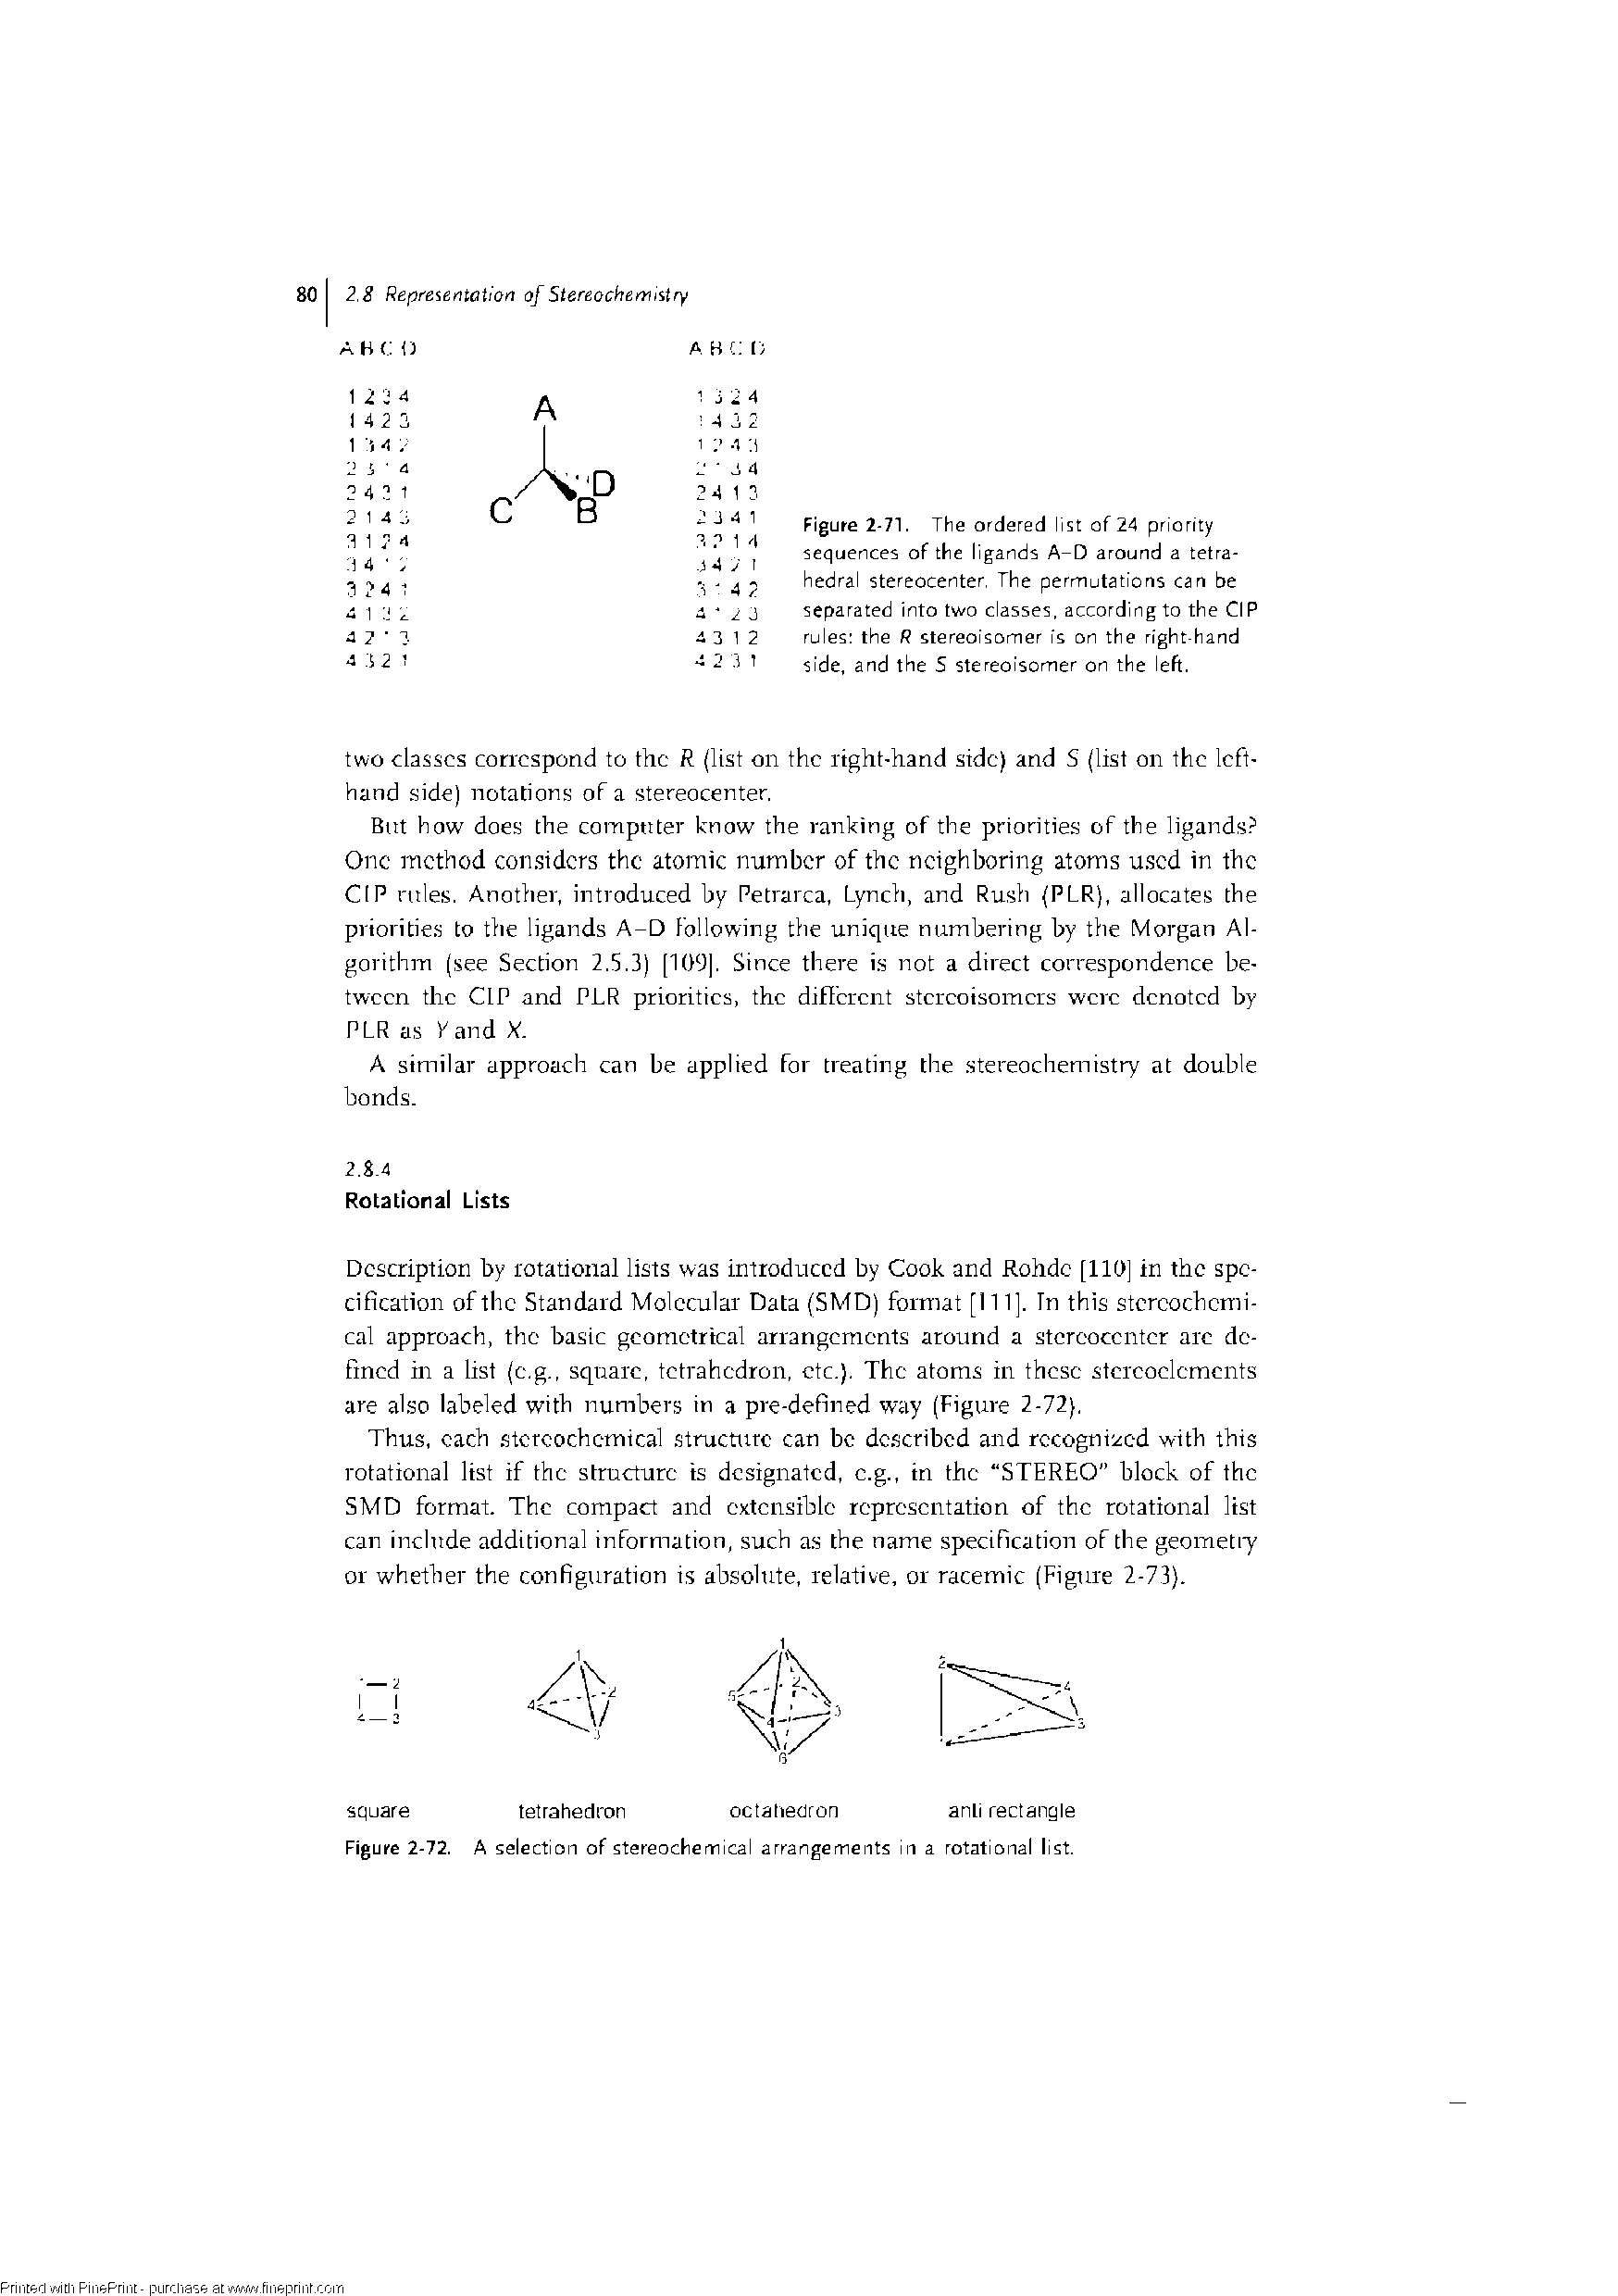 Figure 2-71. The ordered list of 24 priority sequences of the ligands A-D around a tetrahedral stereocenter, The permutations can be separated into two classes, according to the Cl P rules the R stereoisomer is on the right-hand side, and the S stereoisomer on the left.